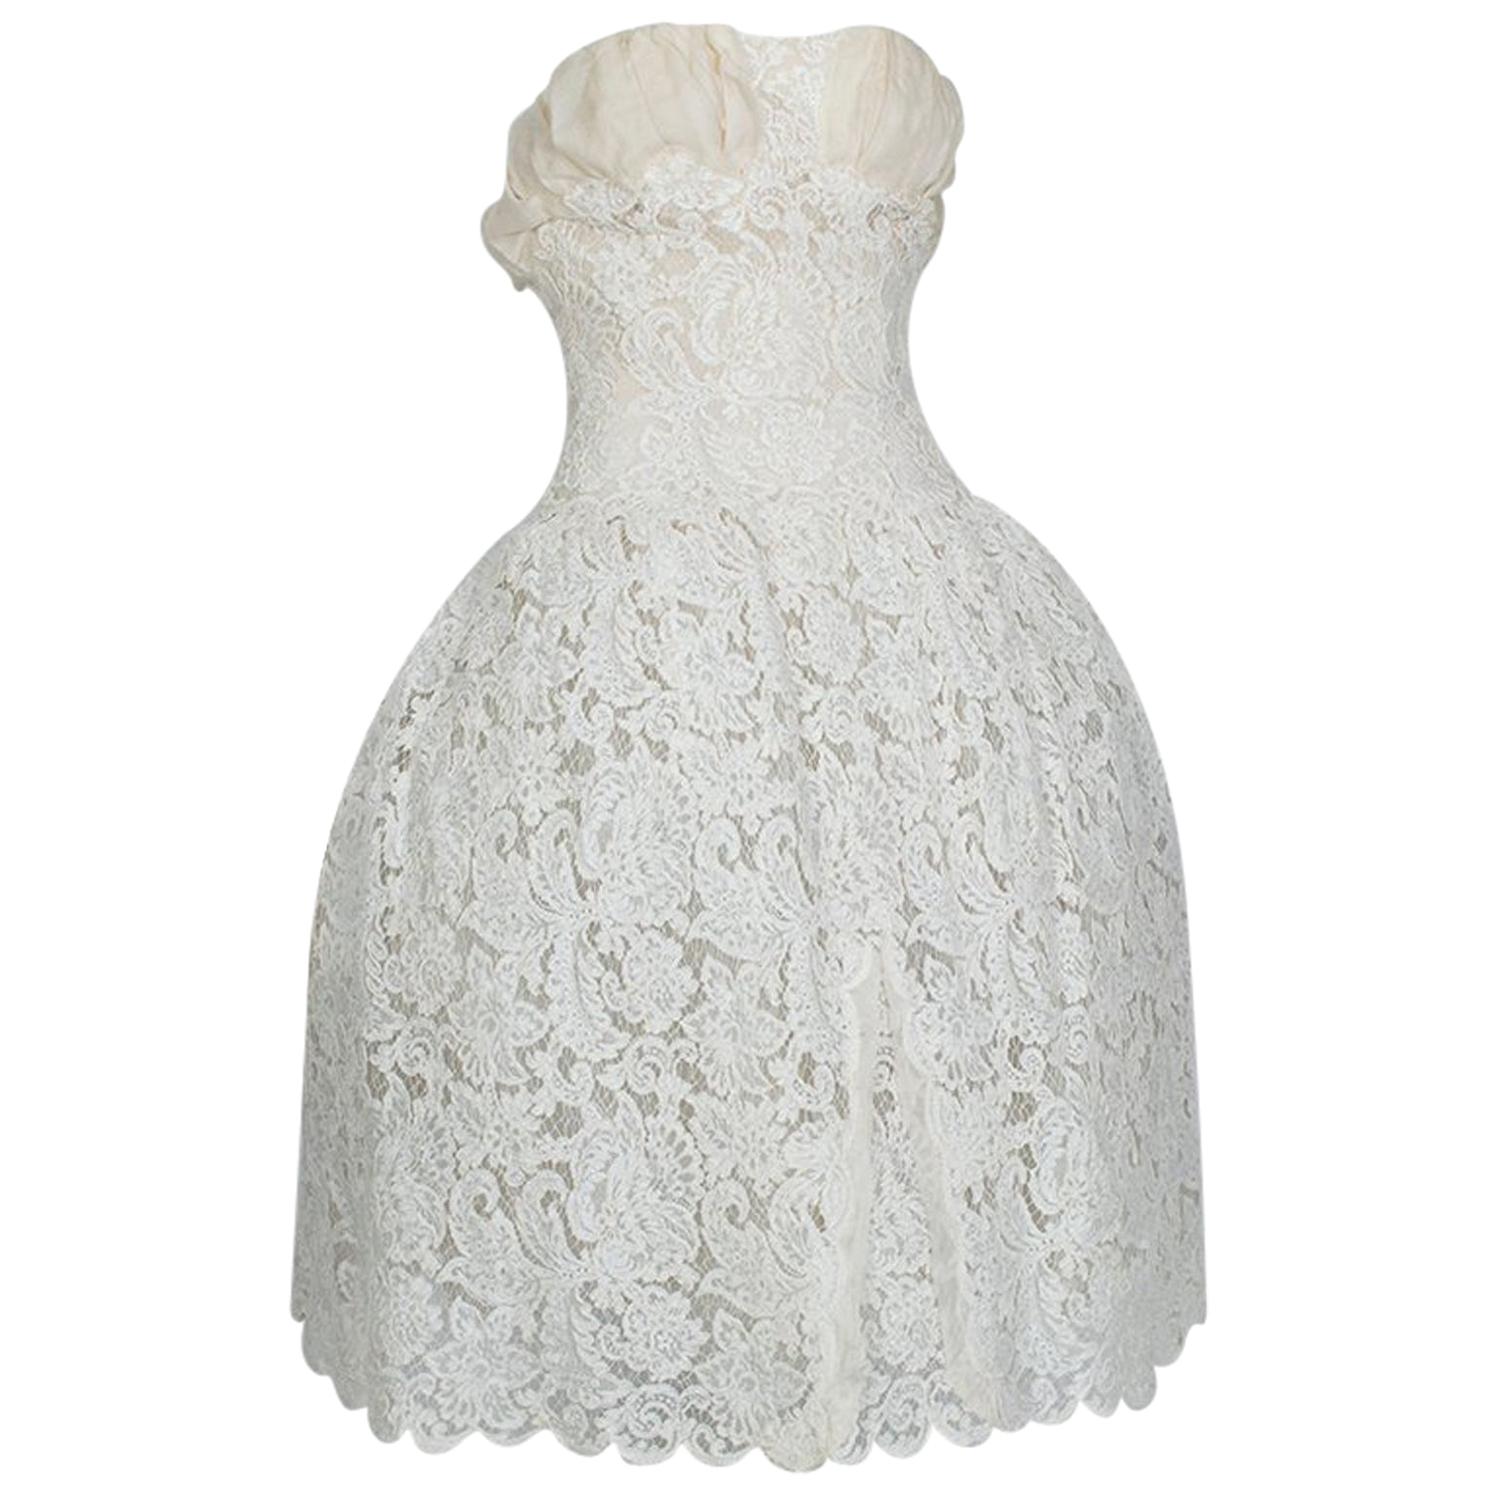 Strapless Ivory Guipure Lace Corseted Robe Française Wedding Dress - XS, 1950s